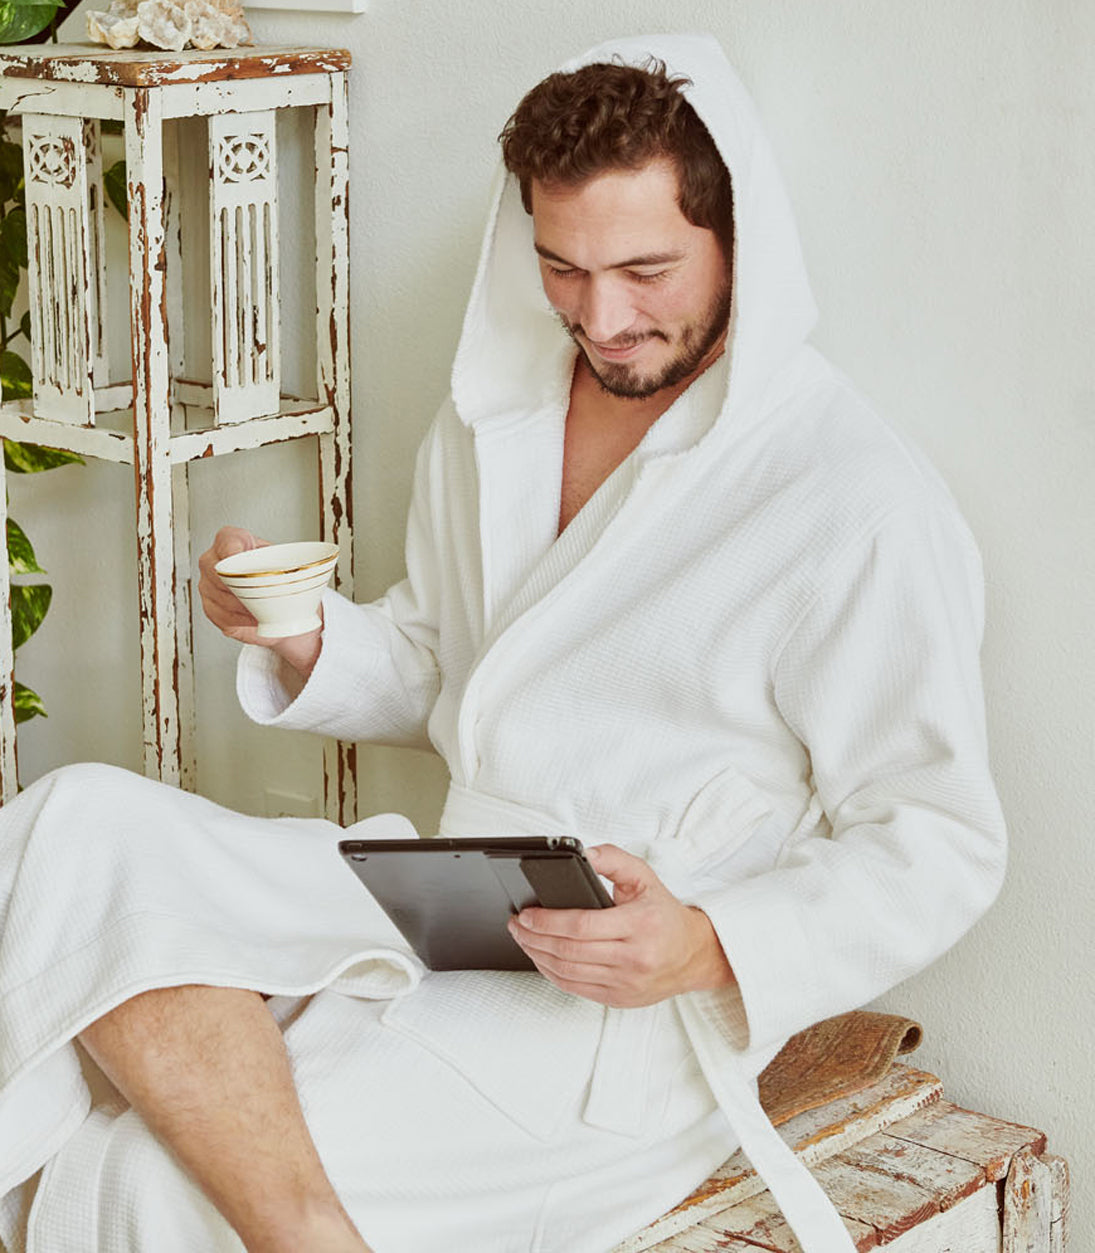 What is the Best Bathrobe To Buy